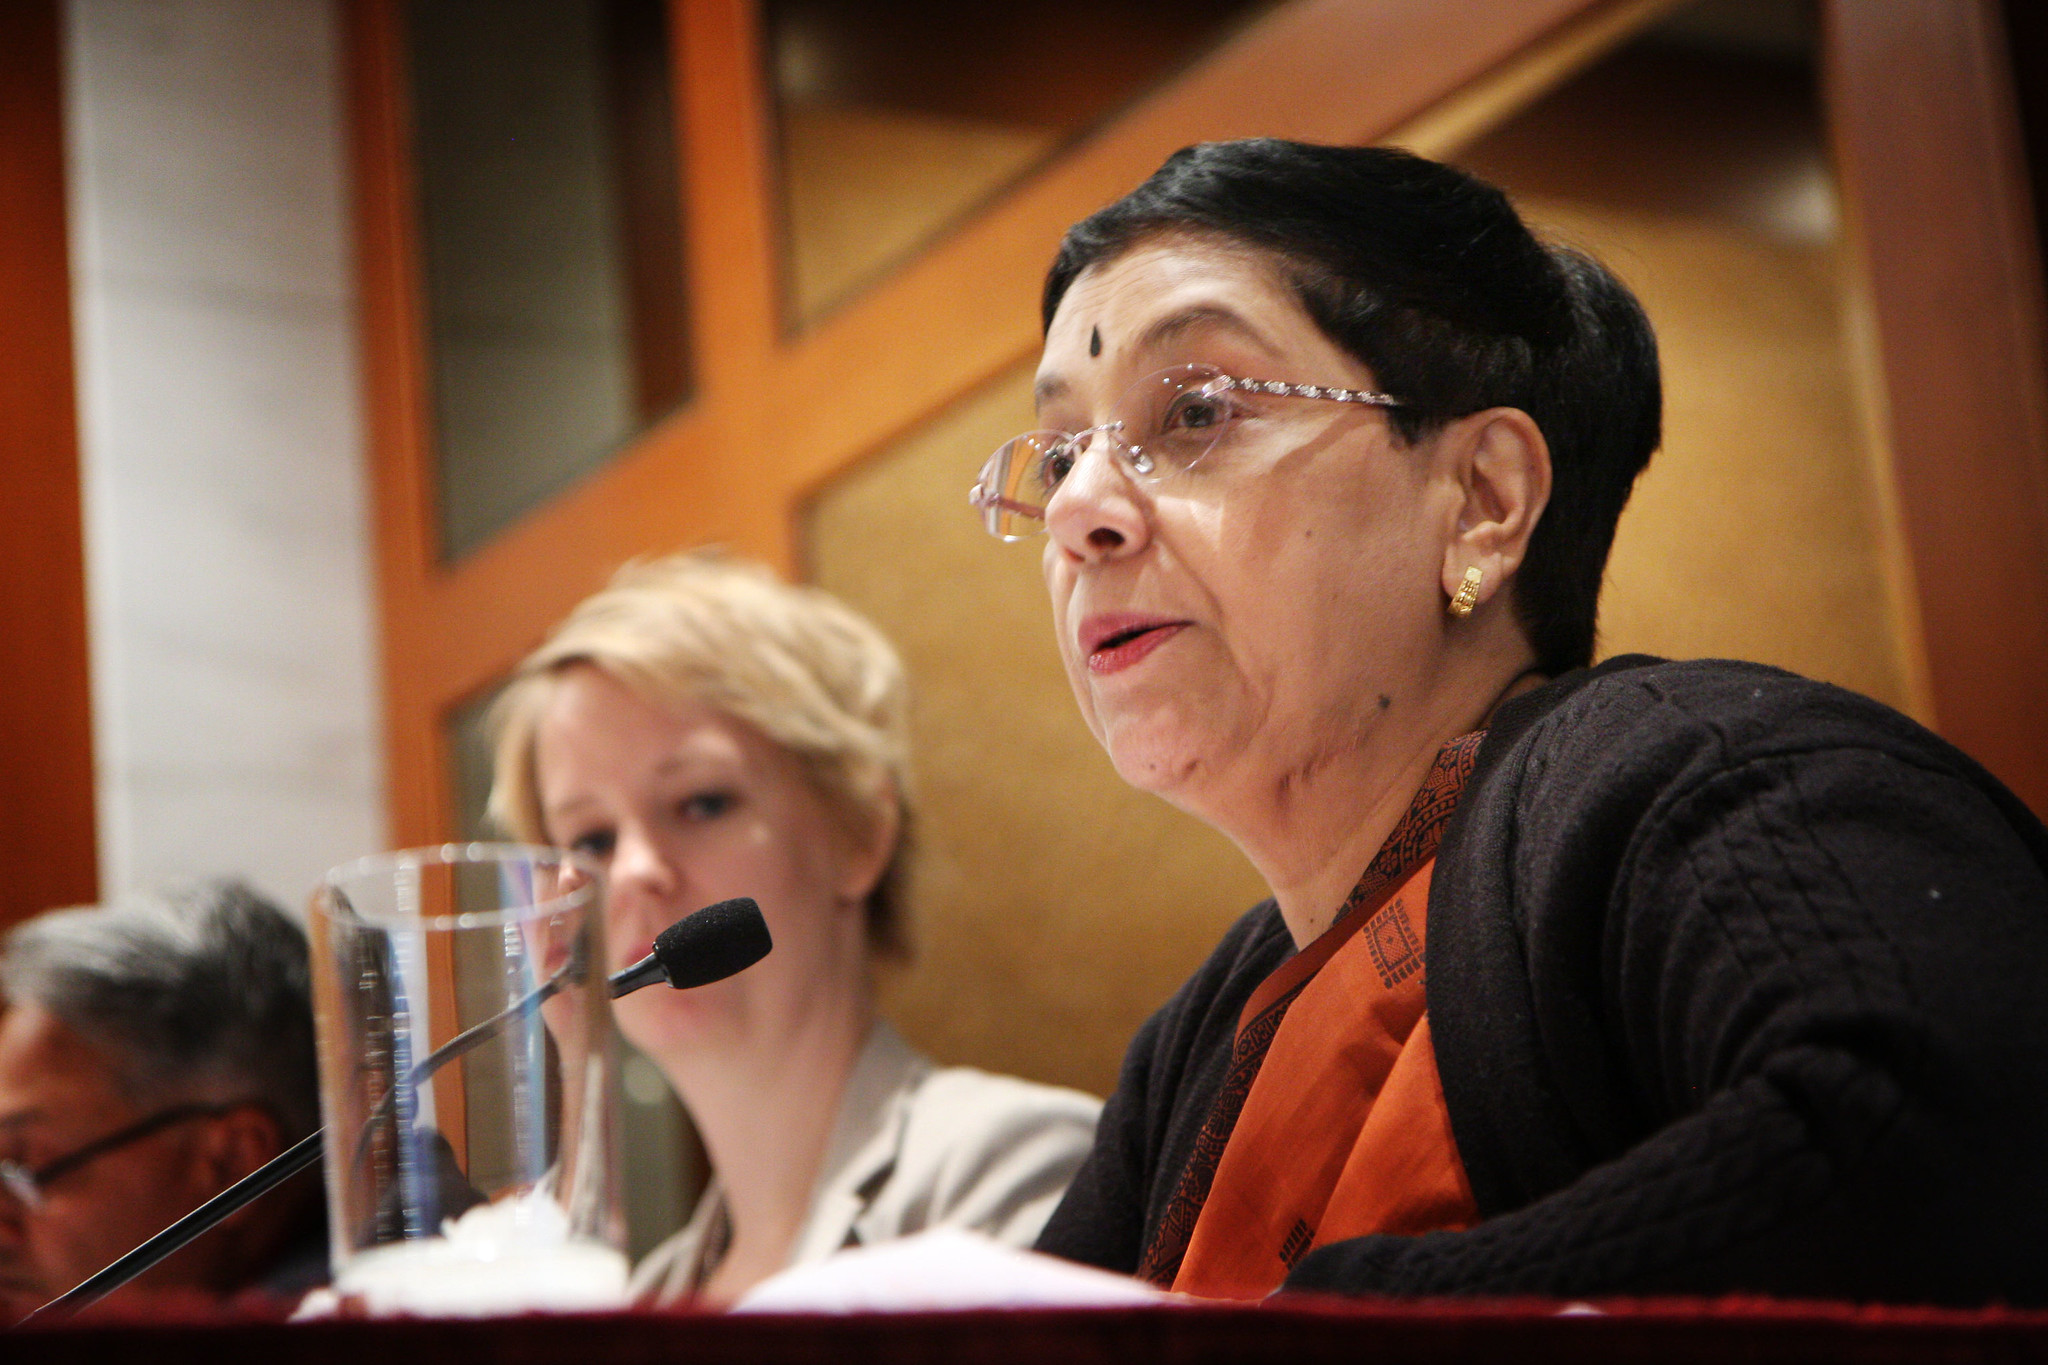 purmnima_mane_unfpa_at_the_launch_of_nepal_action_plan_on_women_peace_and_security_in_new_york_in_2011.